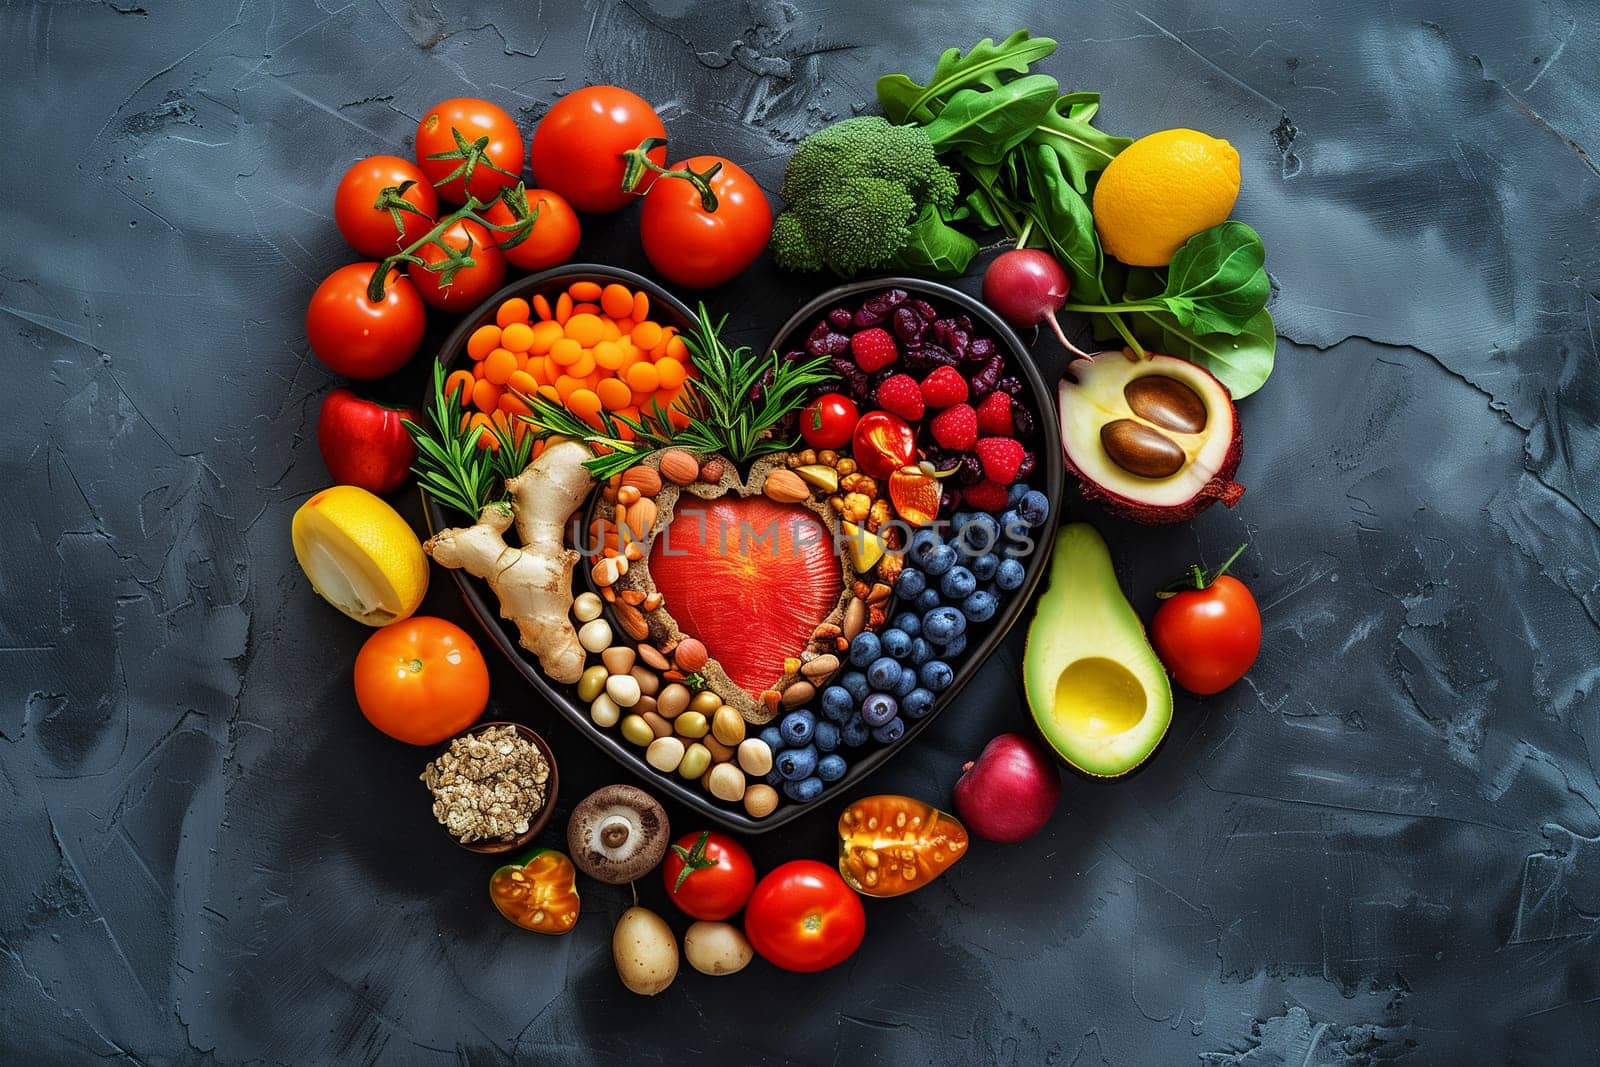 Heart shaped arrangement made from a variety of vibrant fruits and vegetables, showcasing colors and shapes in a creative display.